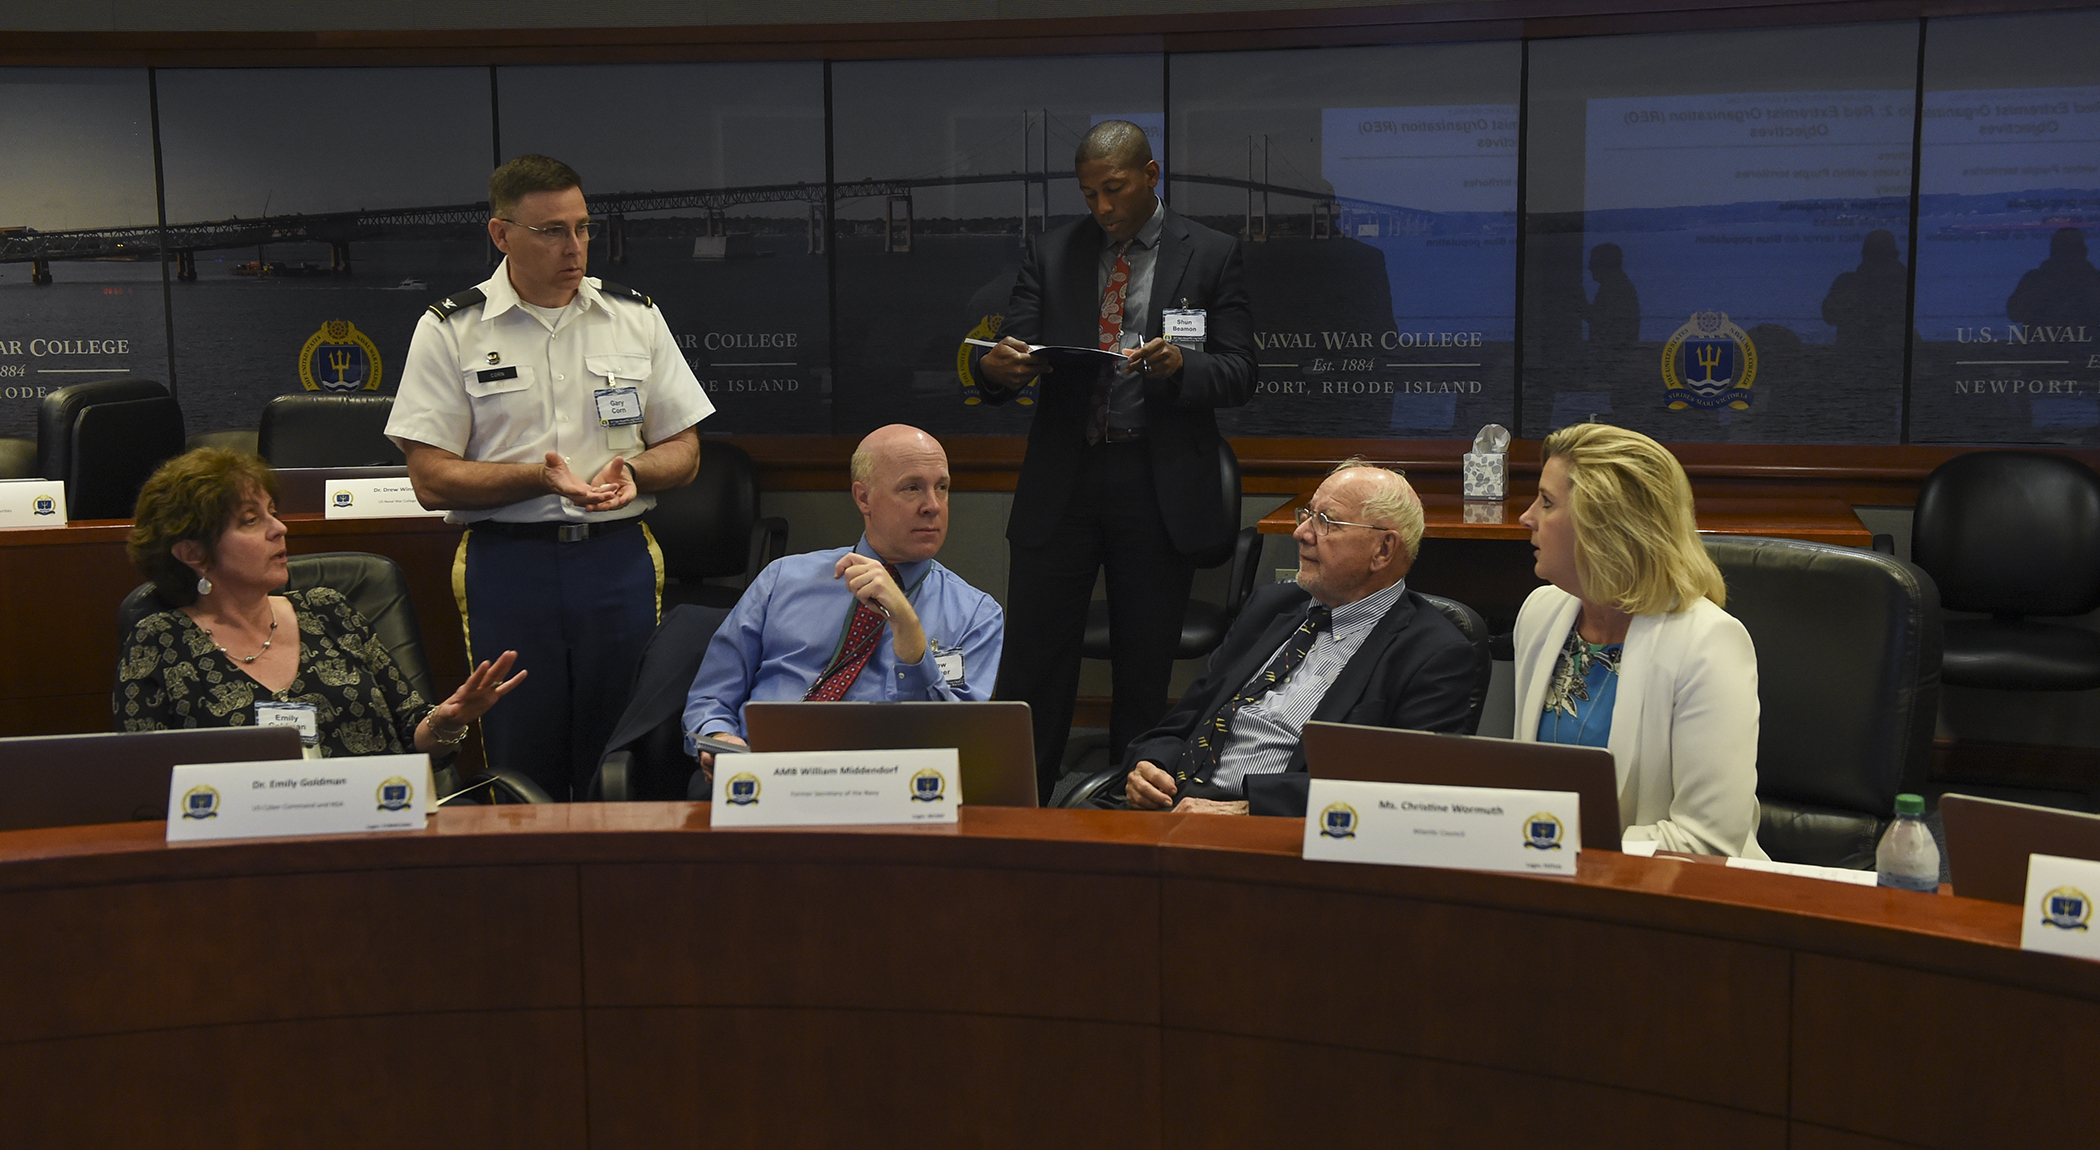 Participants discuss an evolving situation as part of the Navy-Private Sector Critical Infrastructure Wargame held at U.S. Naval War College (NWC), Newport, Rhode Island.